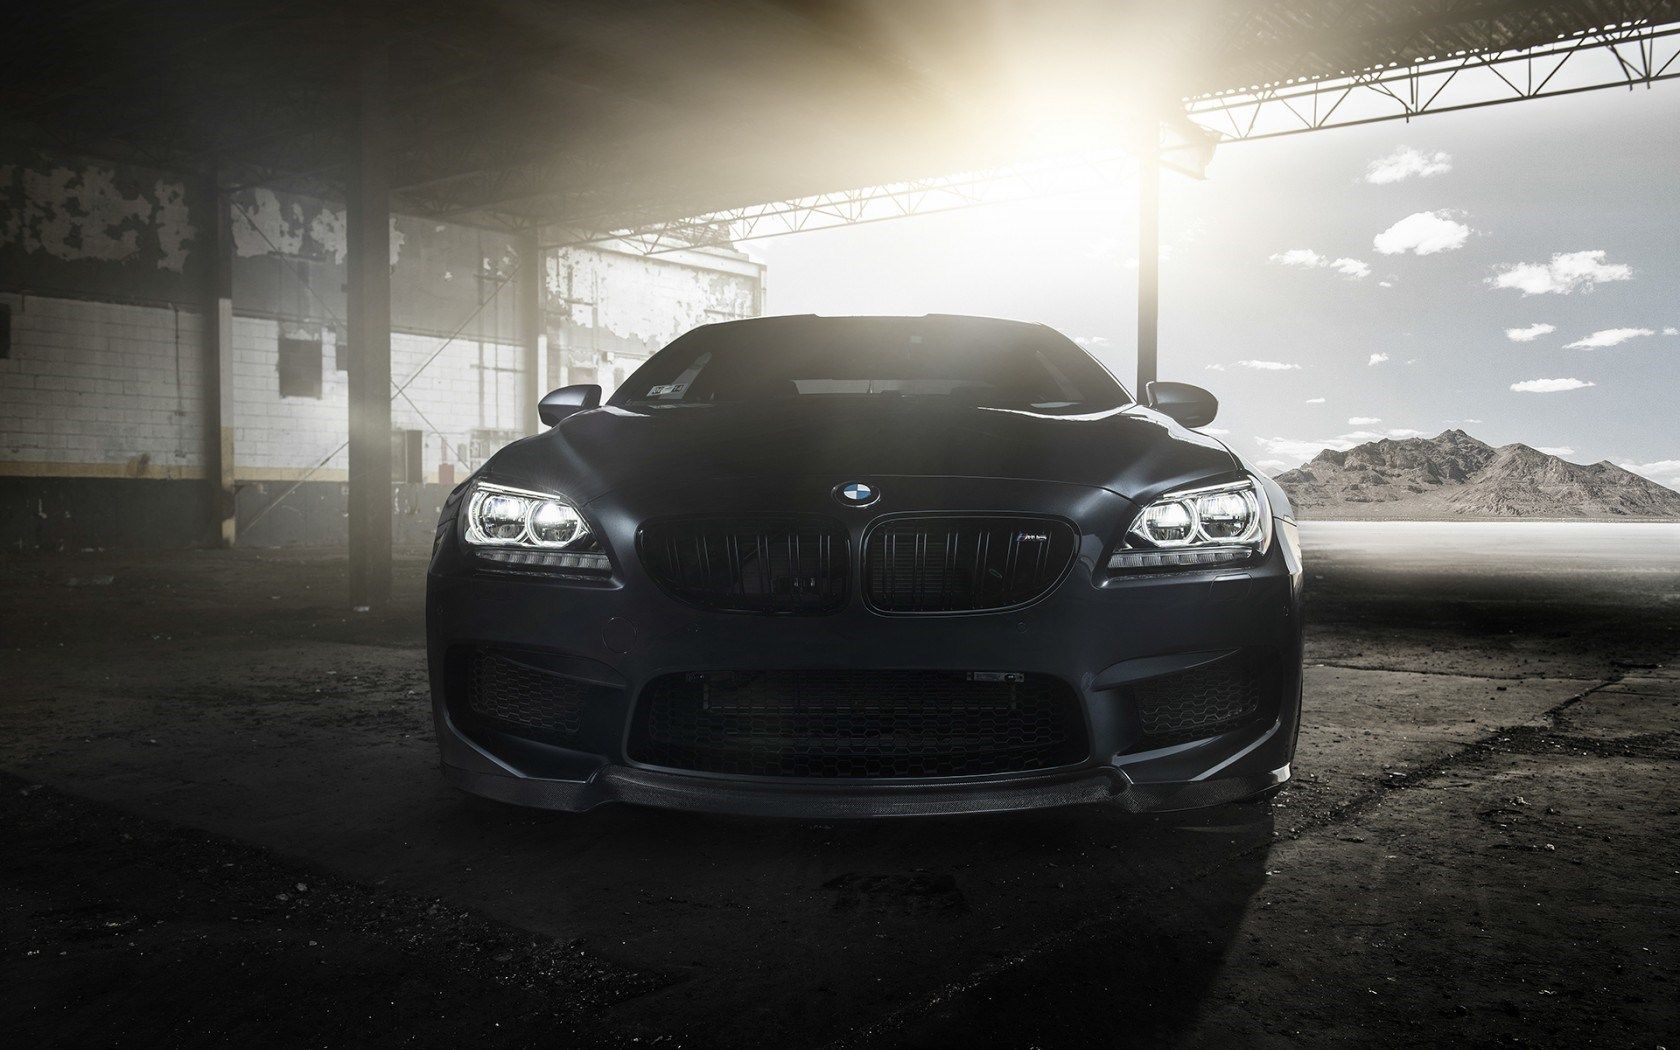 Mobile wallpaper: Bmw M Bmw, Cars, Front View, Machine, Car, 149576 download the picture for free